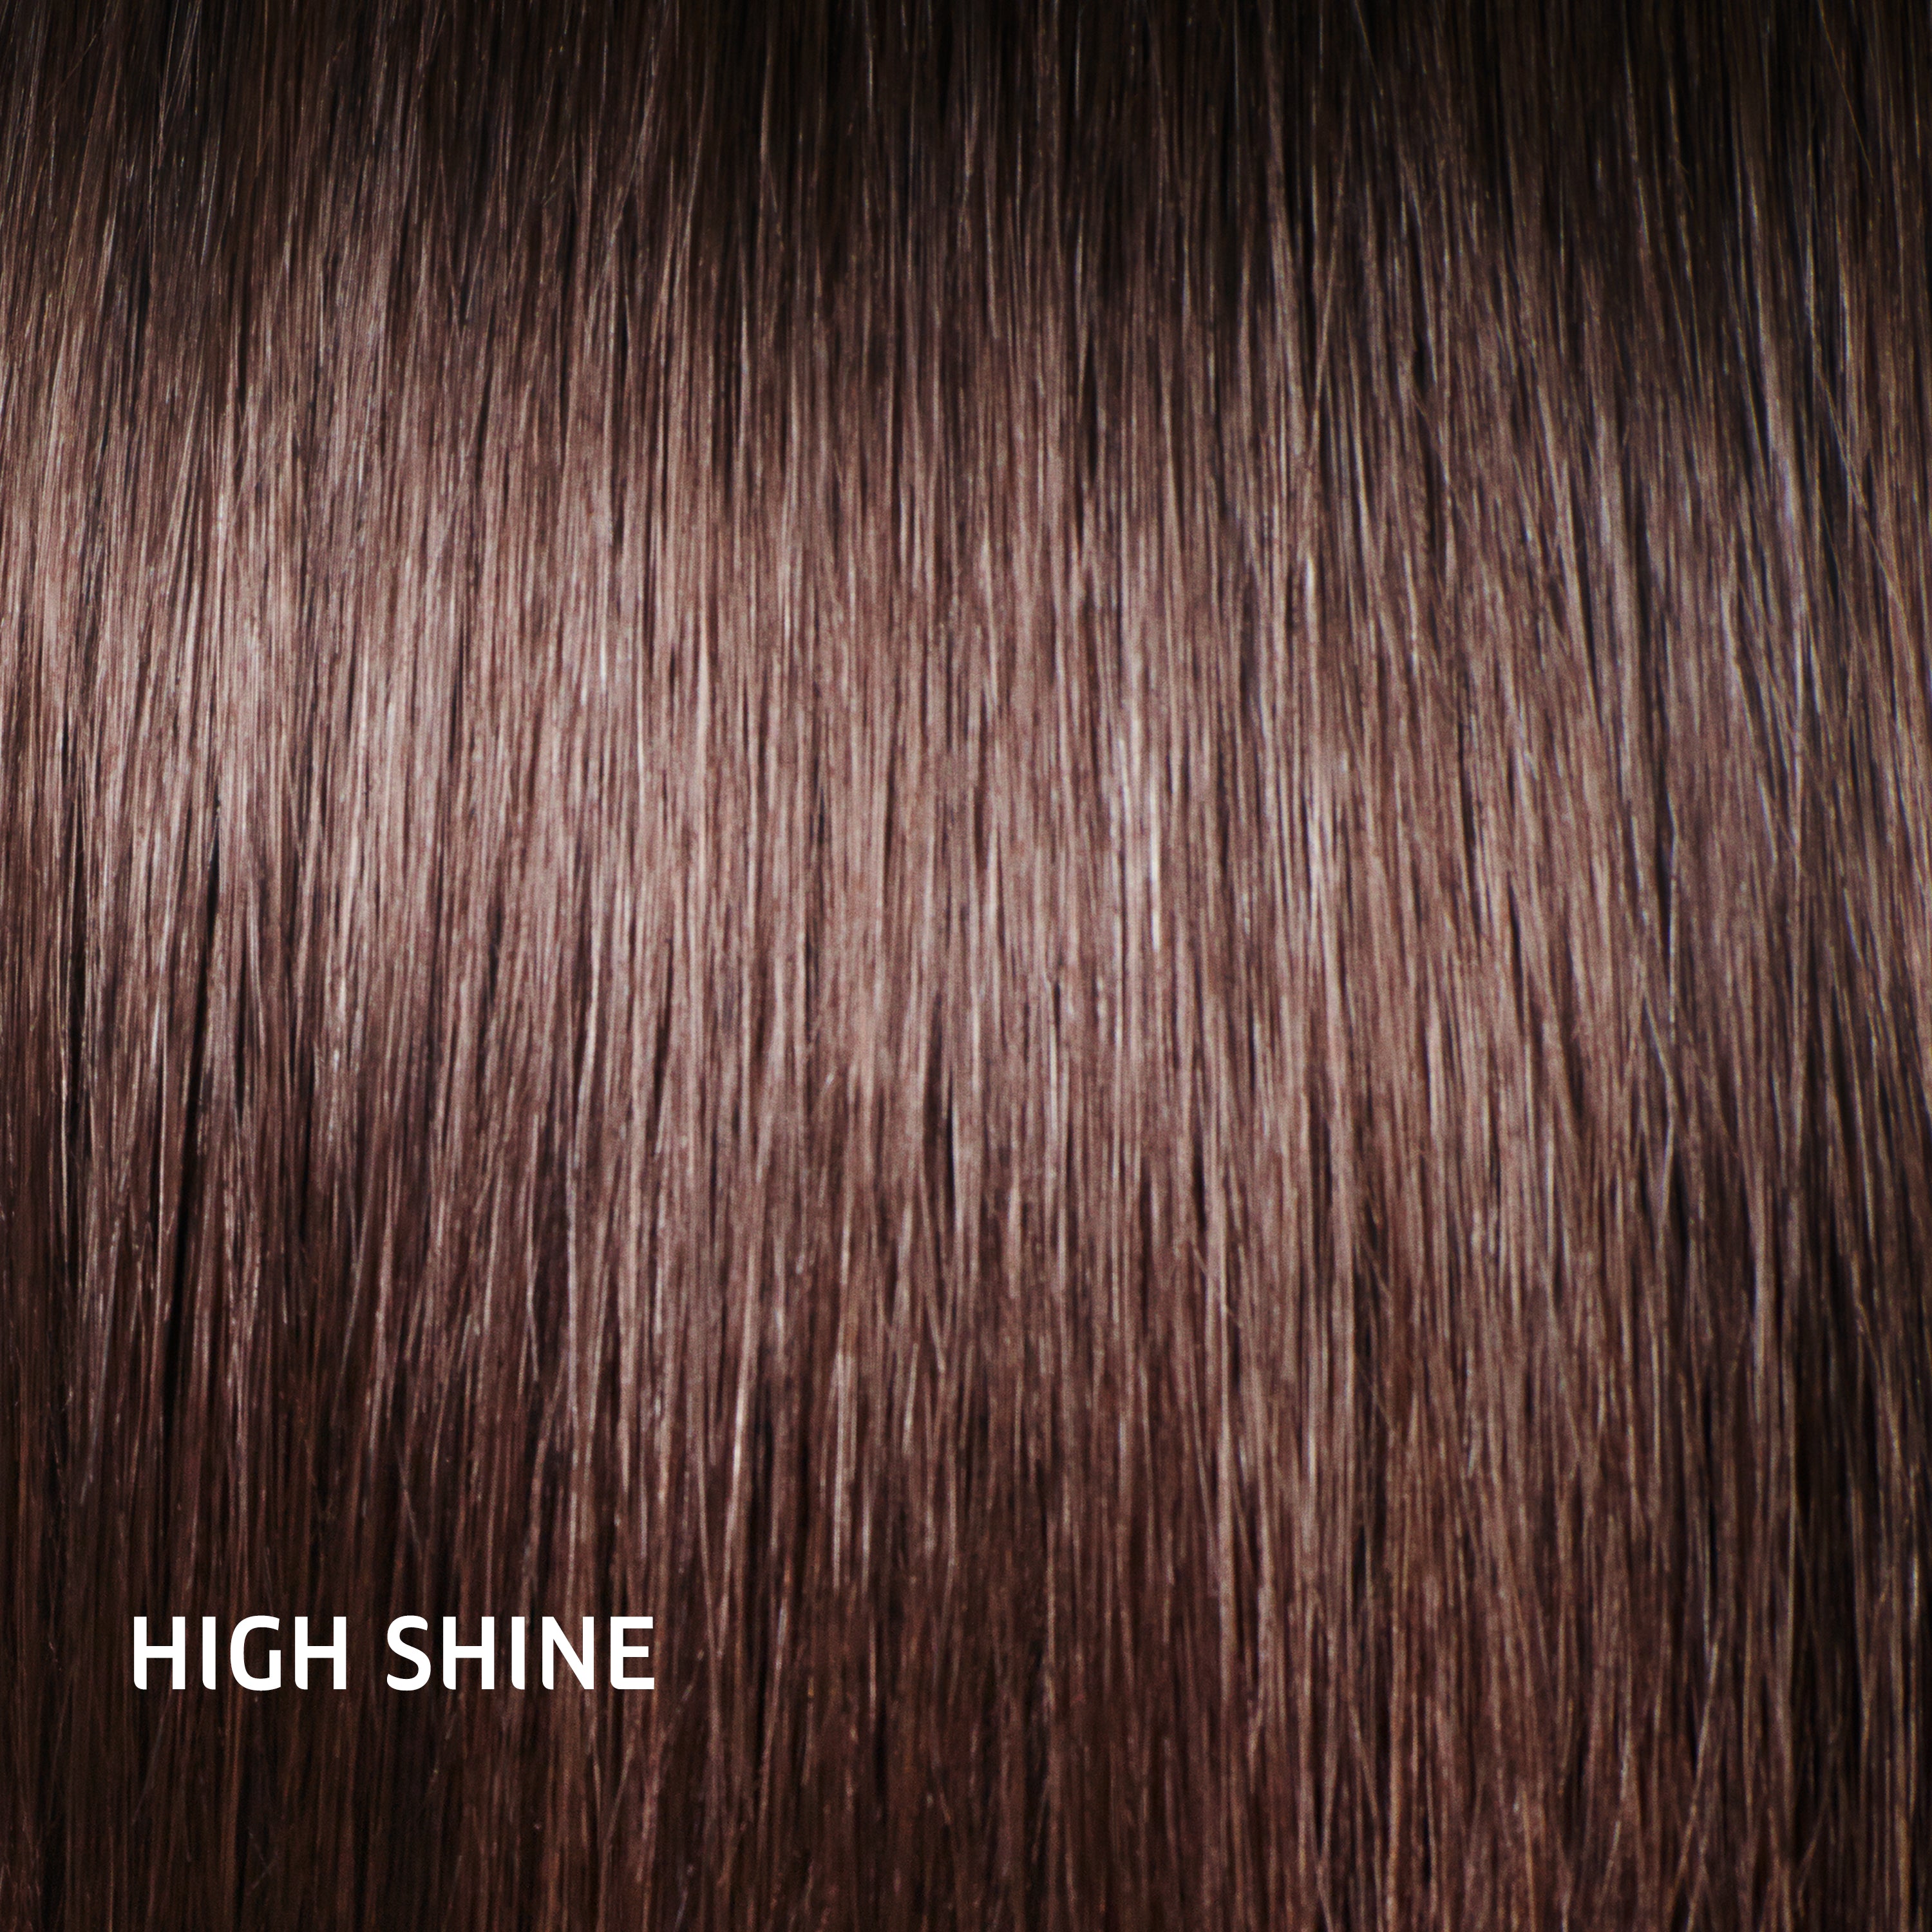 Wella Professional Color Touch Rich Naturals 7/1 Aske Mediumblond